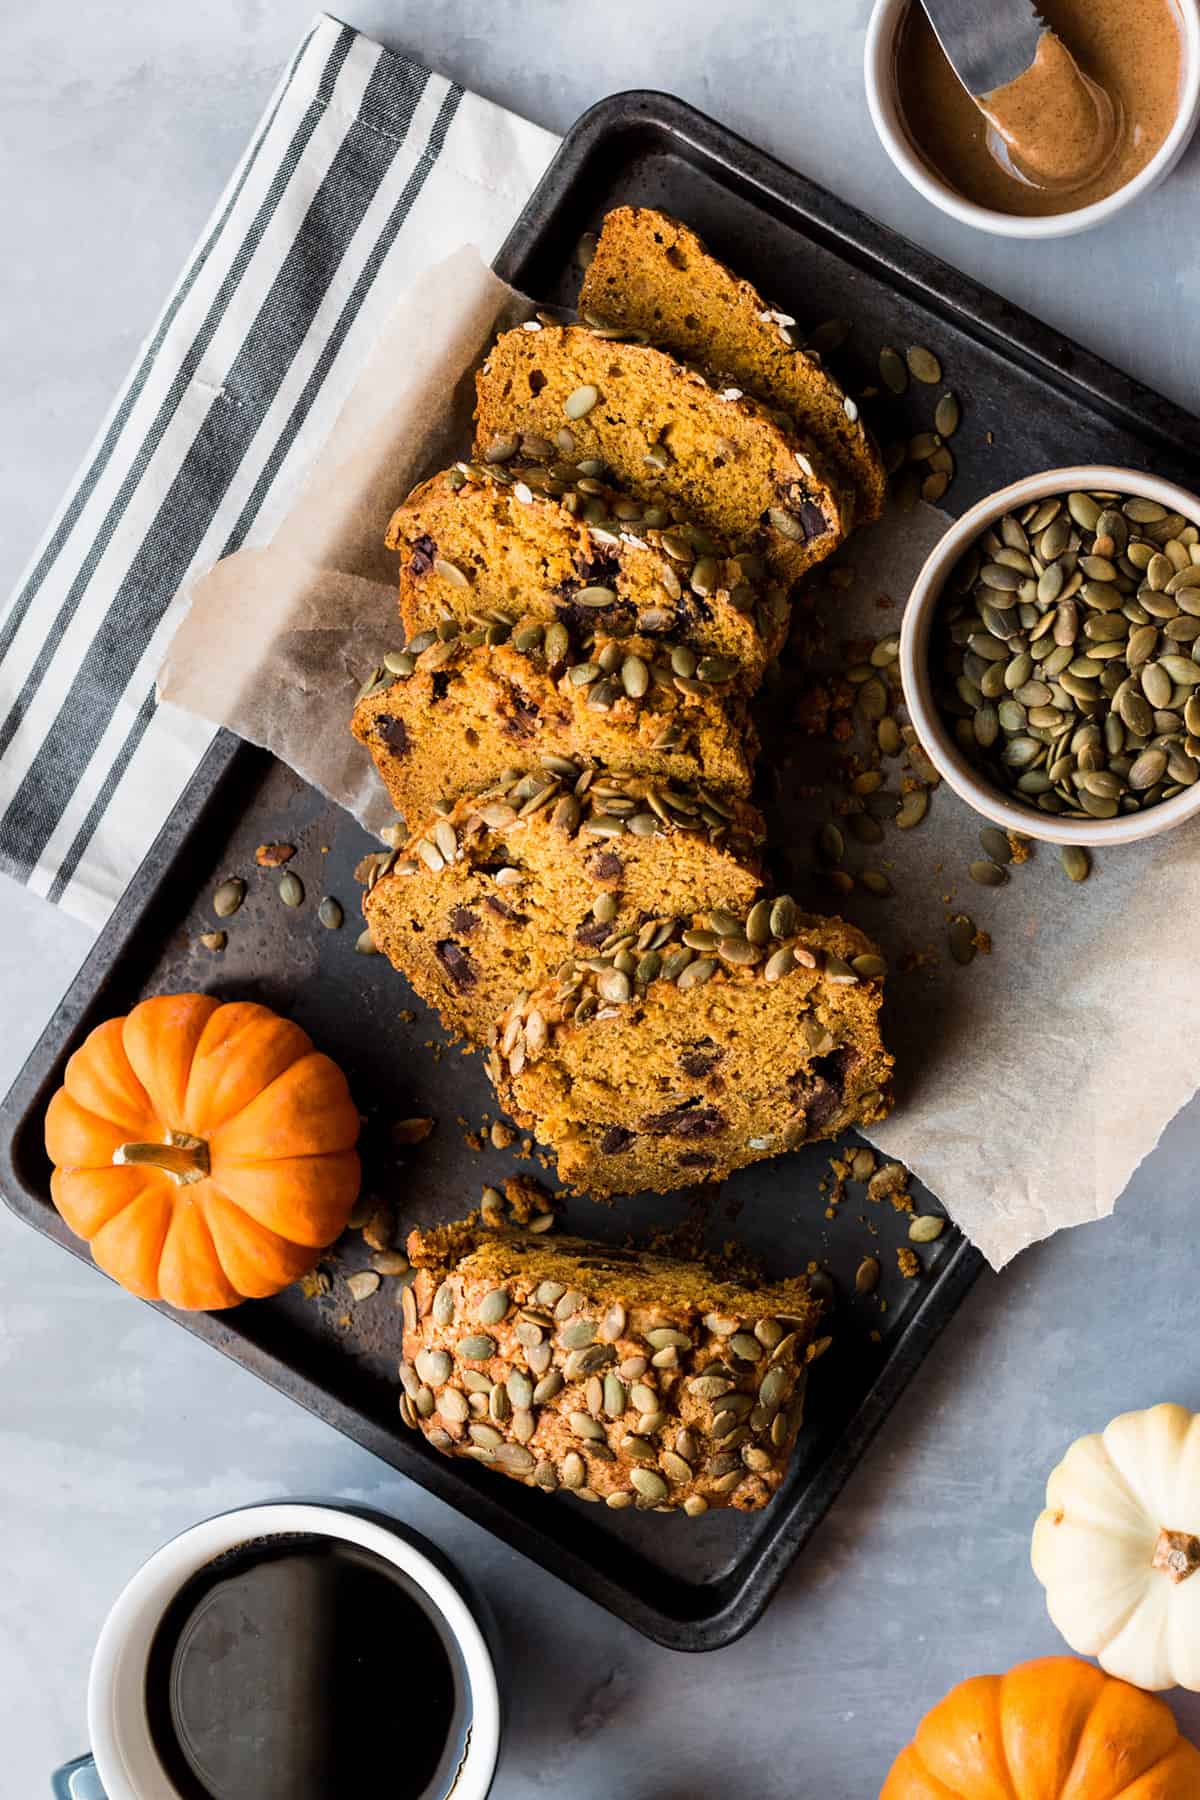 Birds eye view of vegan pumpkin bread cut into slices on a baking tray with surrounding pumpkin seeds, coffee, peanut butter, and pumpkin ornaments.